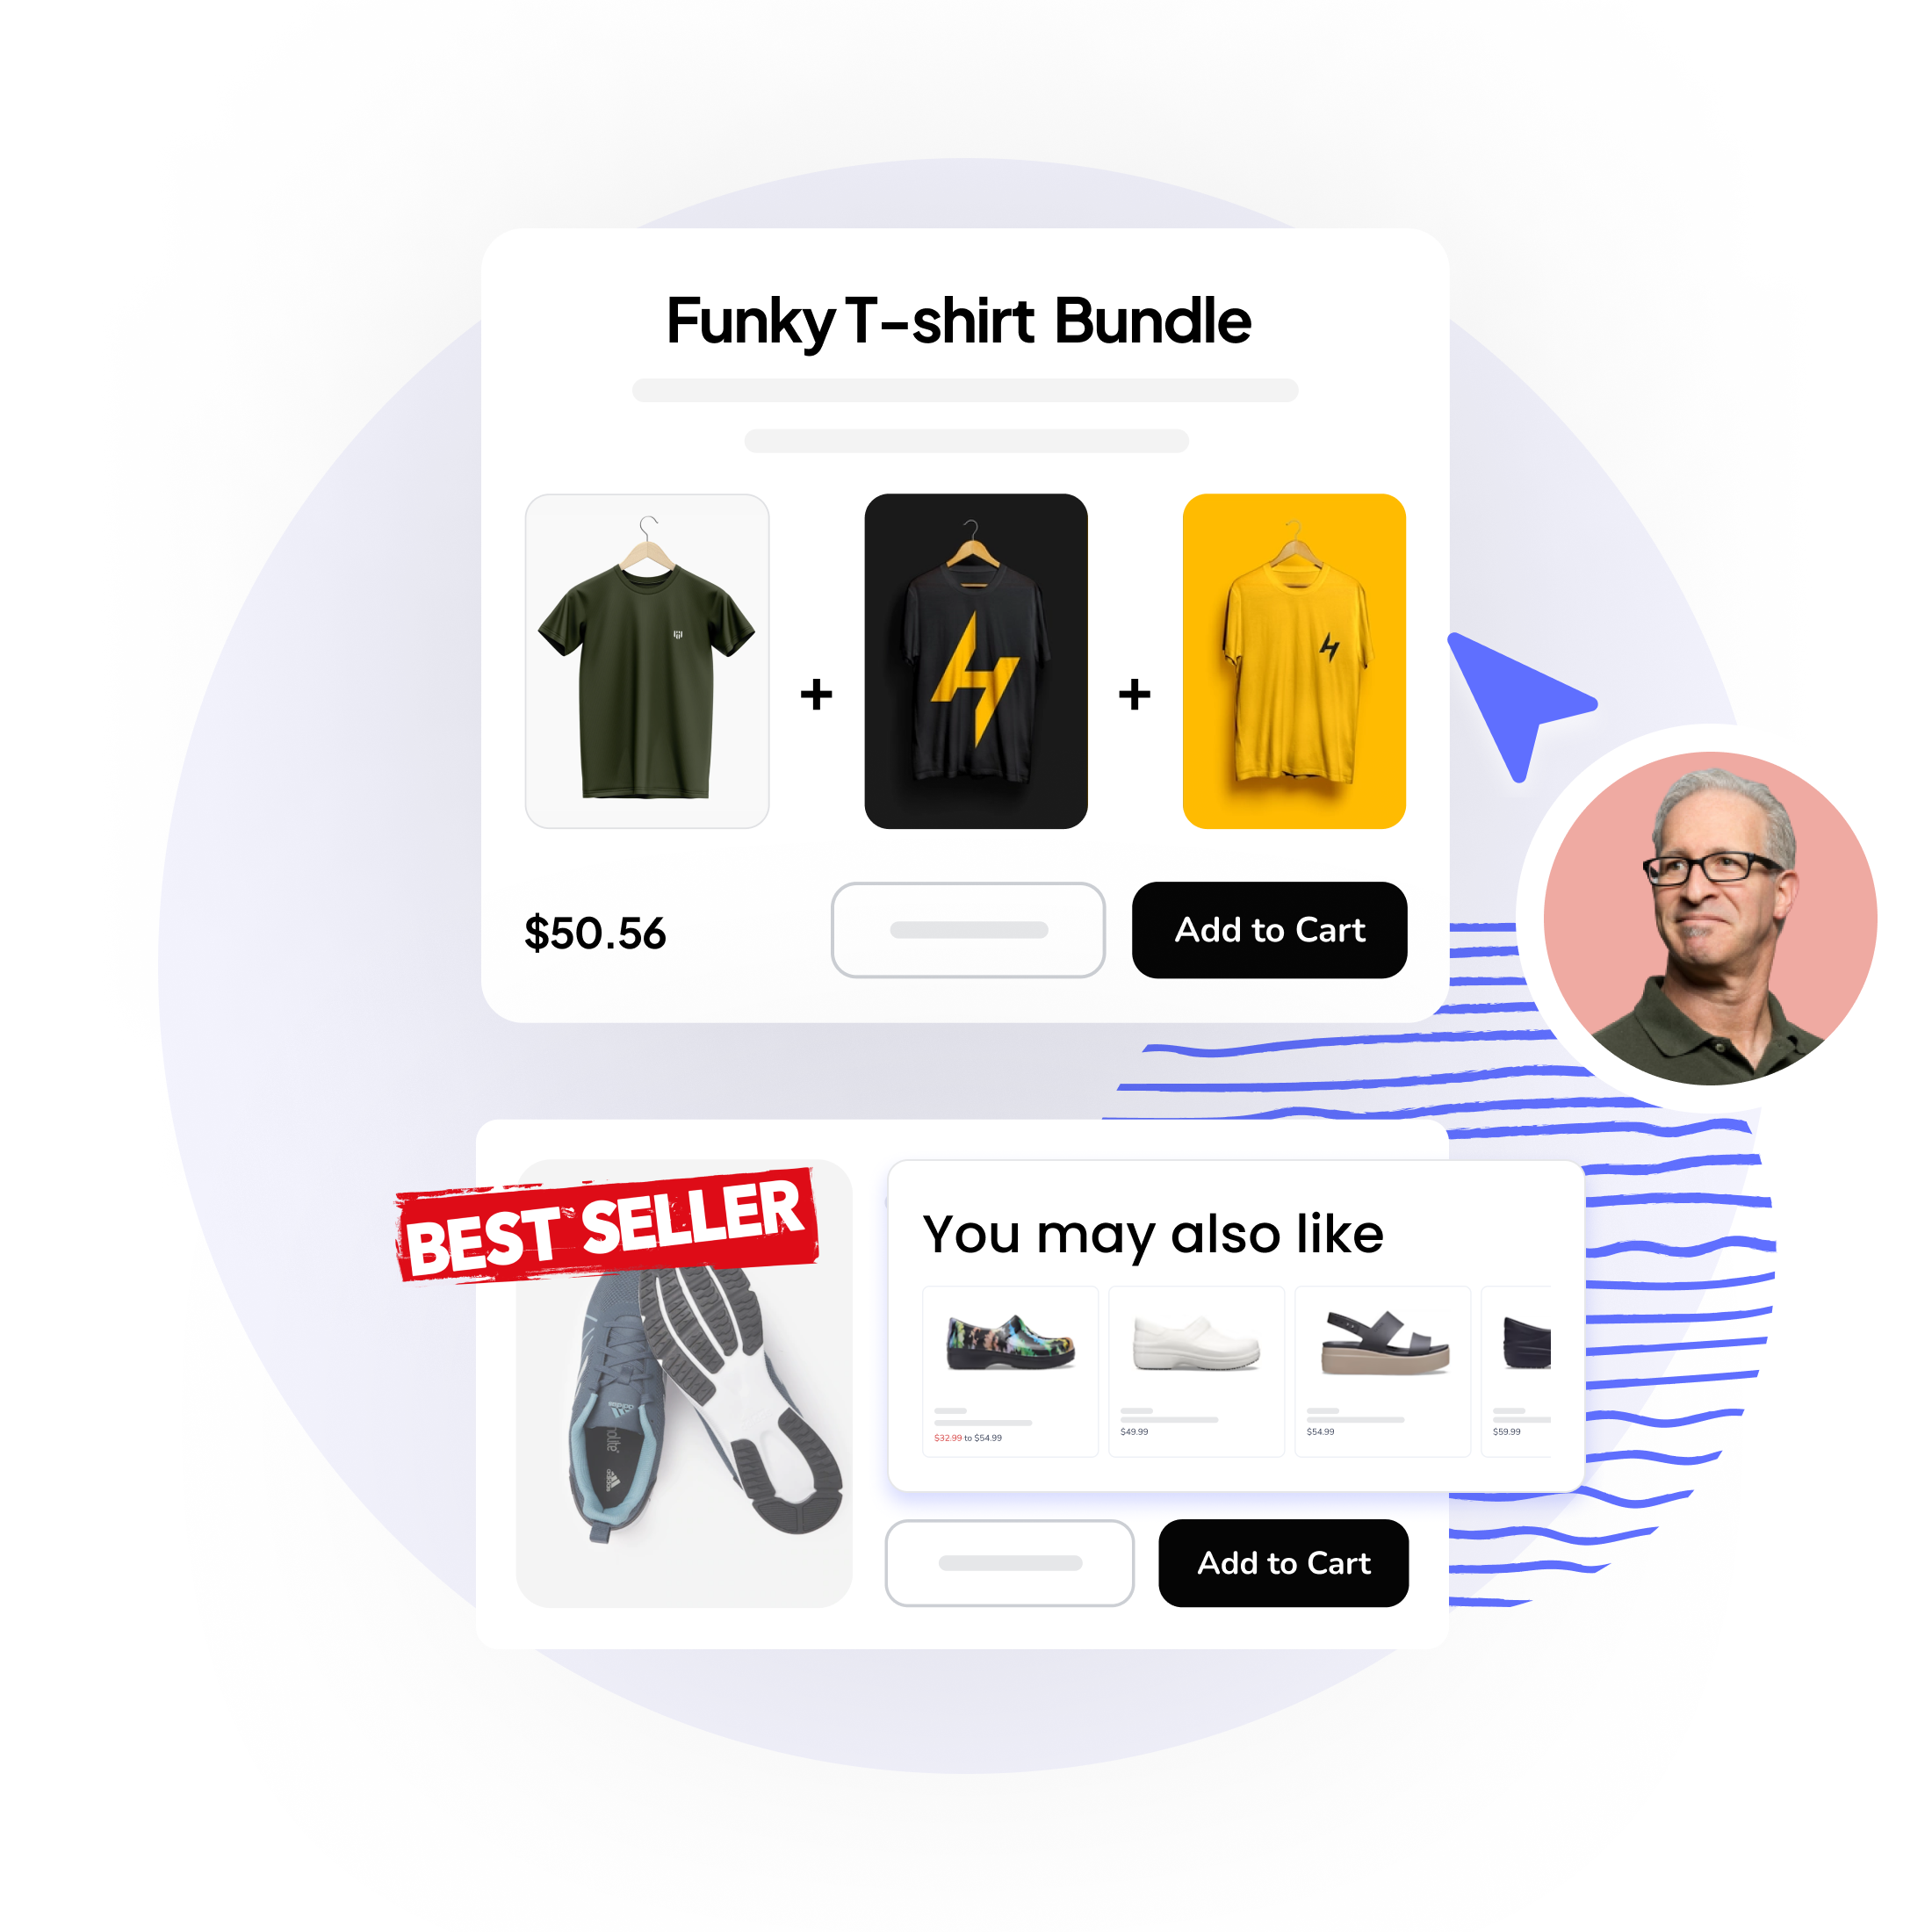 Examples of ModeMagic's product bundle and bestseller playbooks